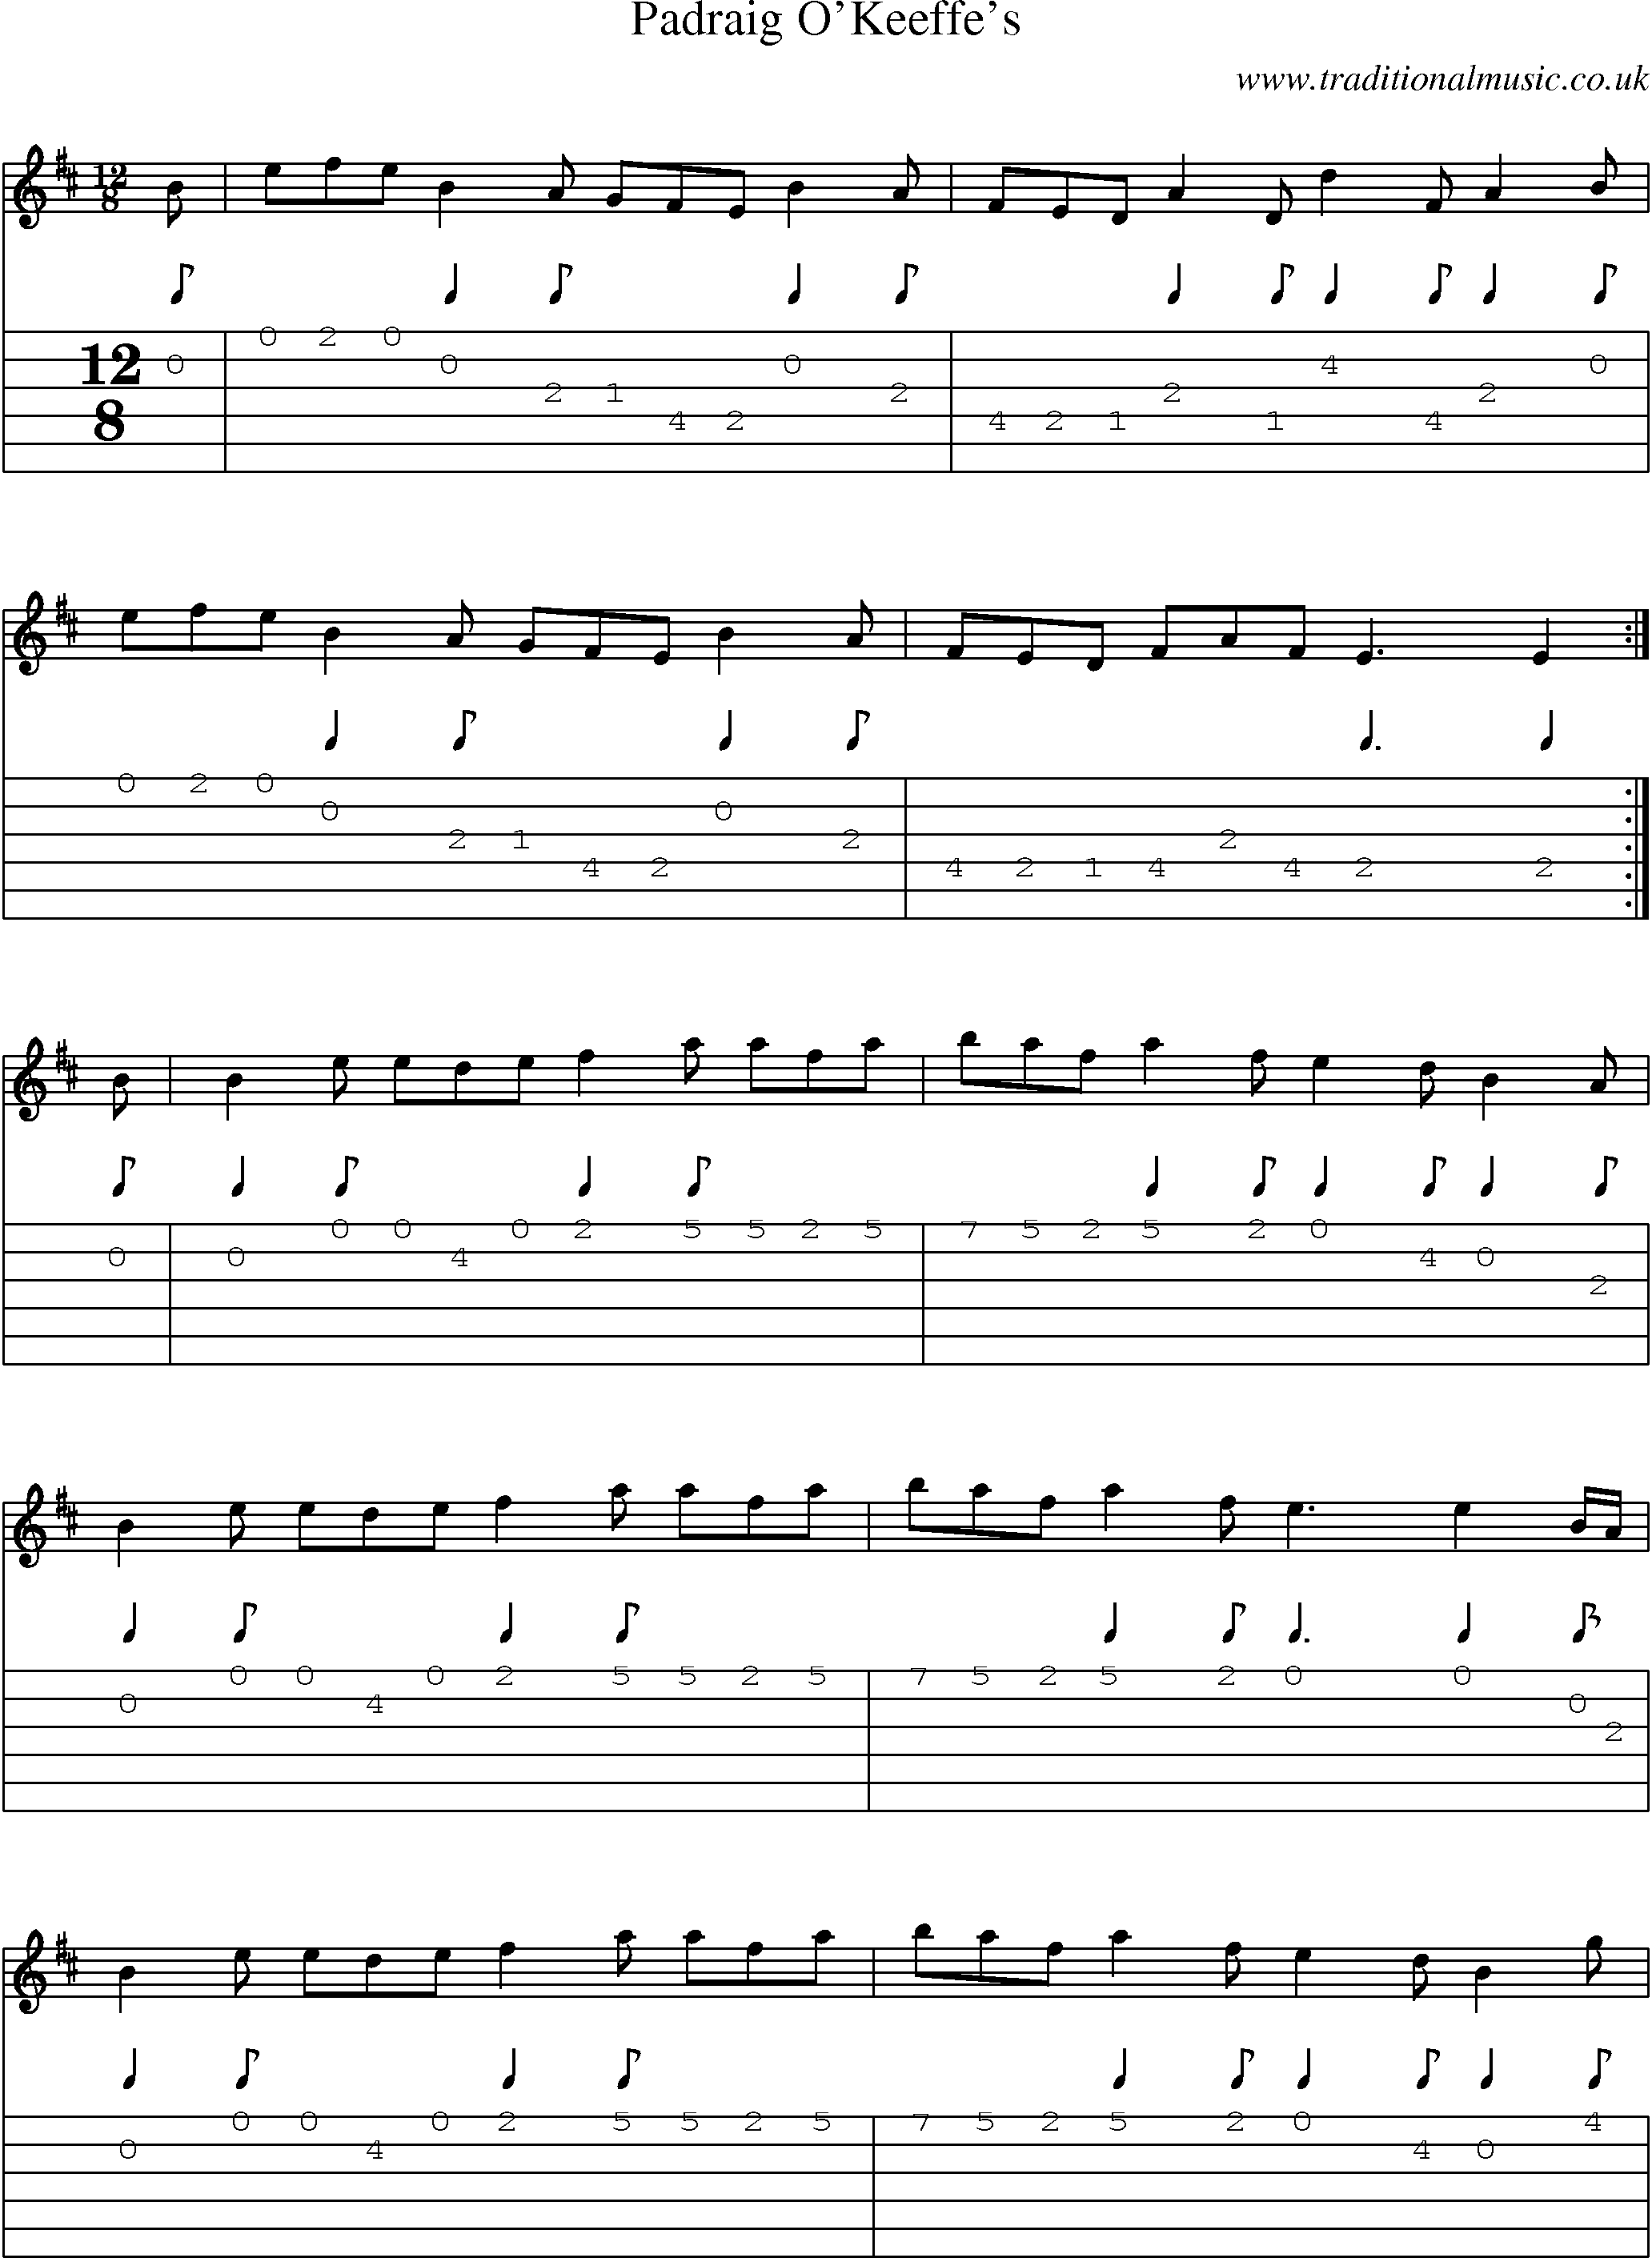 Music Score and Guitar Tabs for Padraig Okeeffes